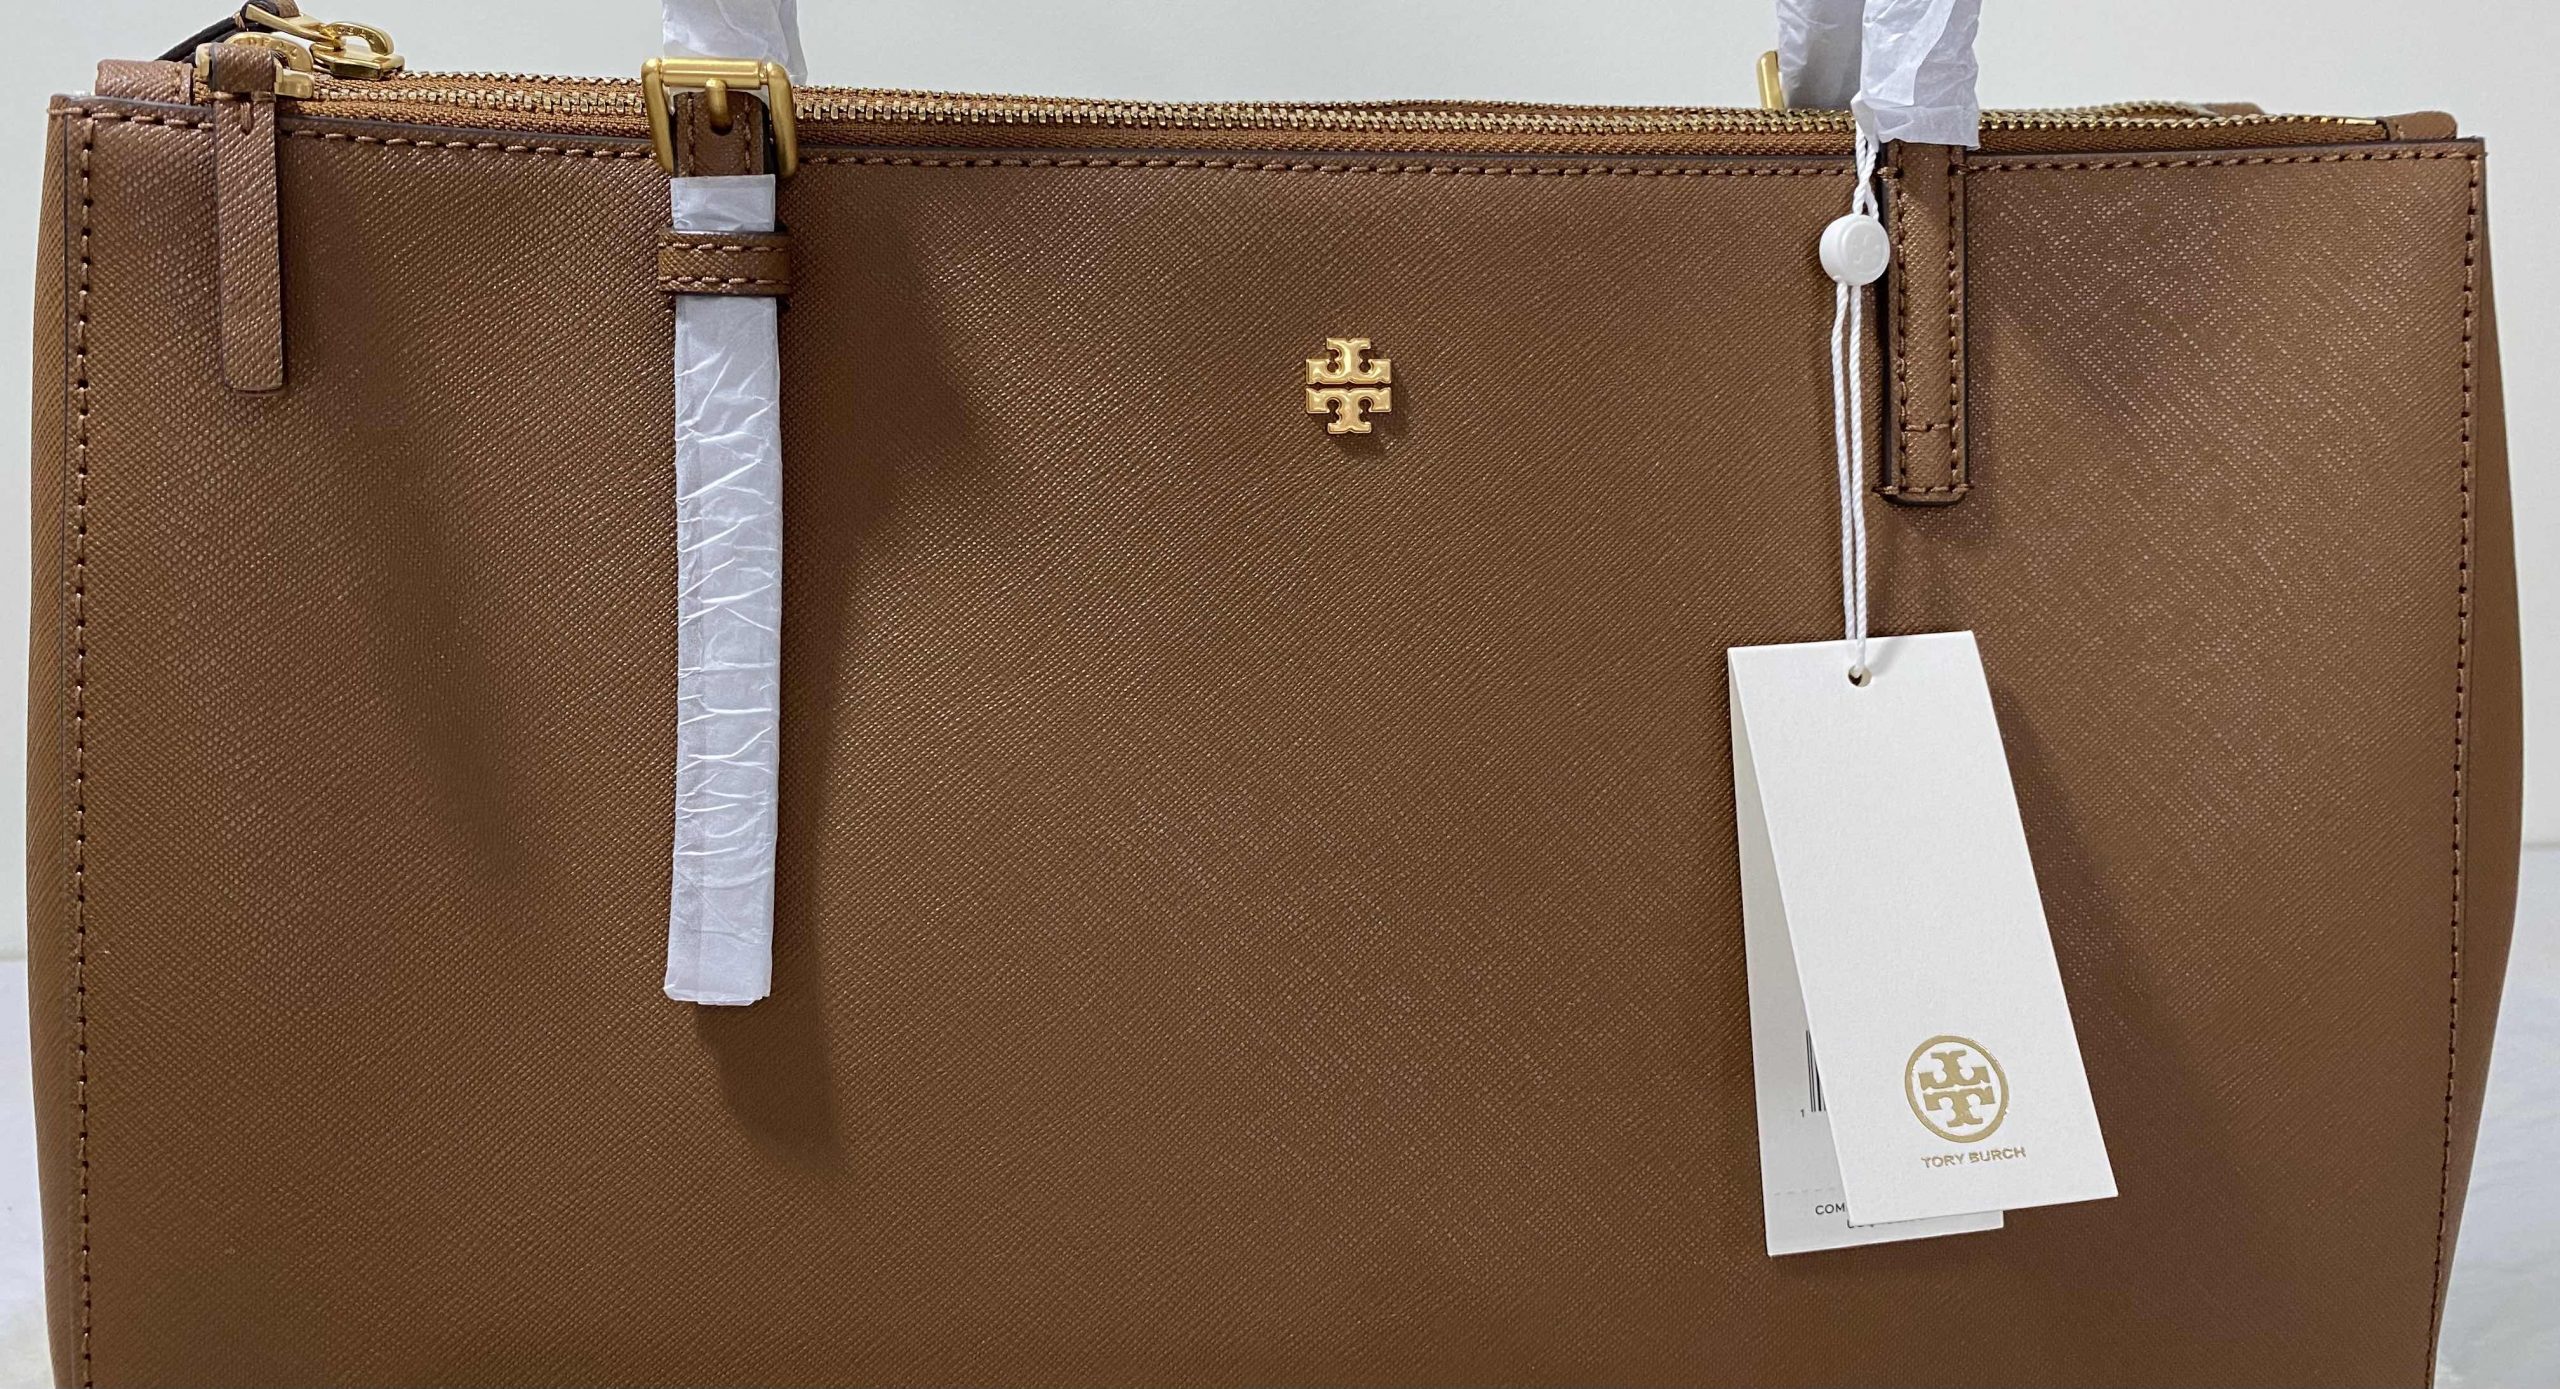 Buy Tory Burch Emerson Small Buckle Tote York Shoulder Bag Luggage